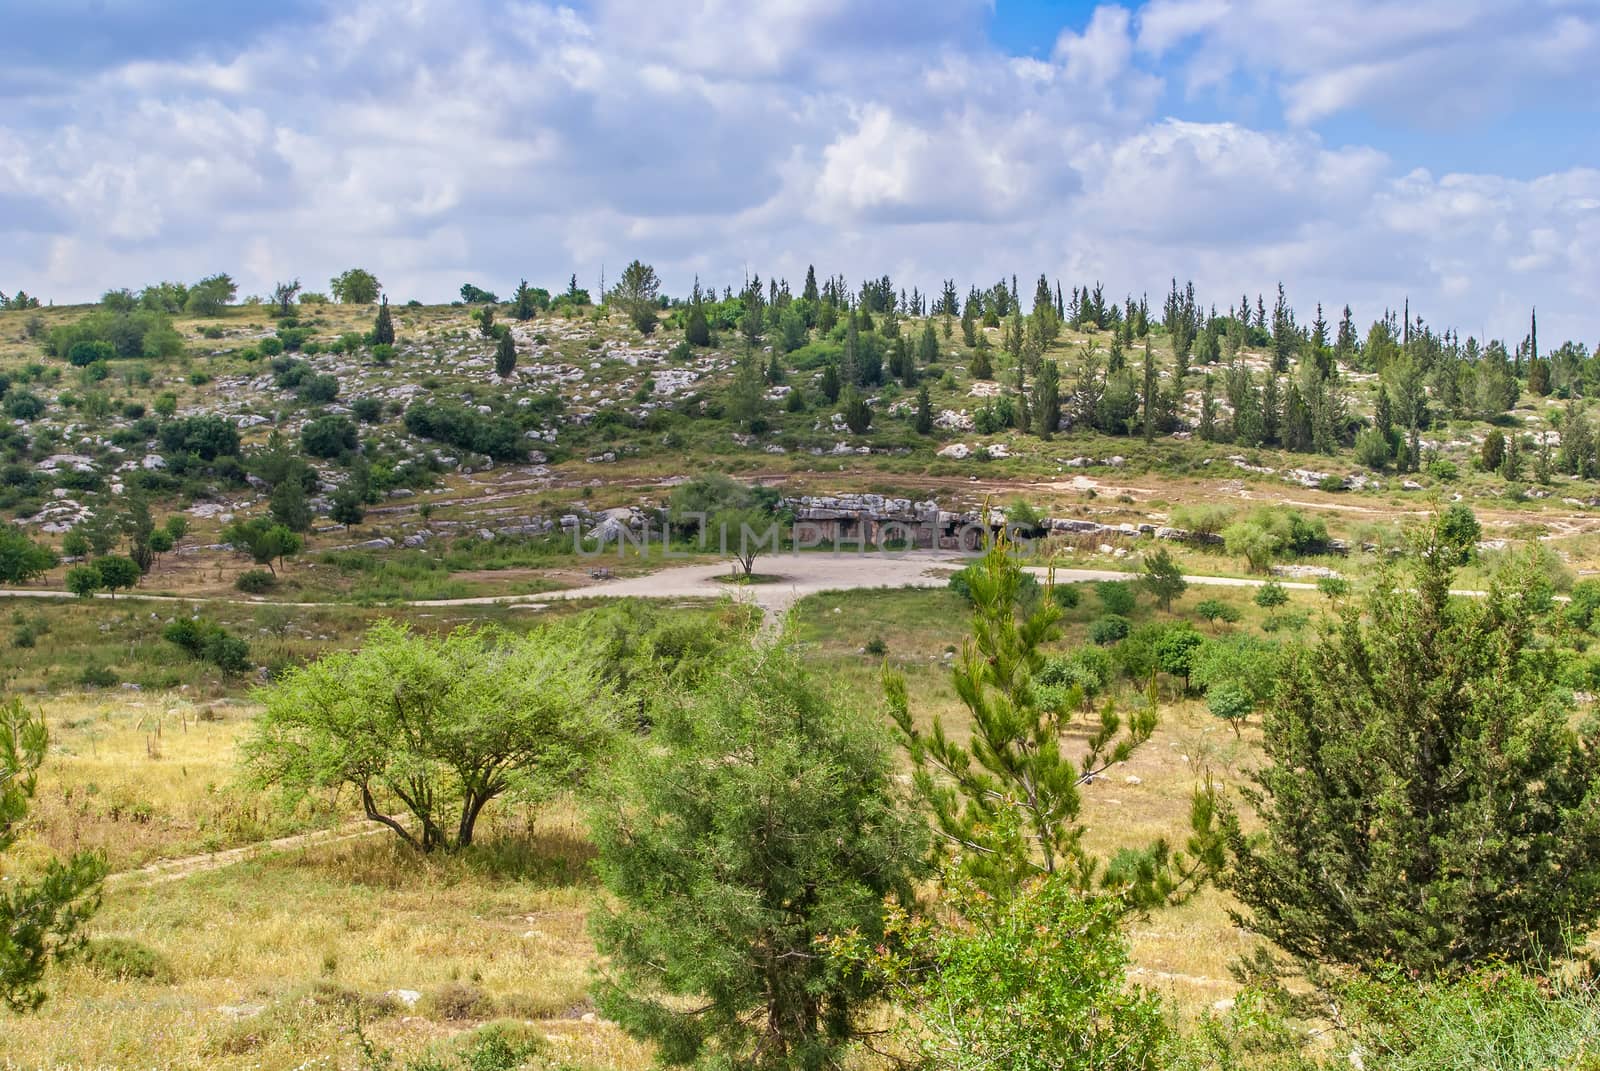 Israel landscape, forest, mountains with cave in Israel. Modiin 